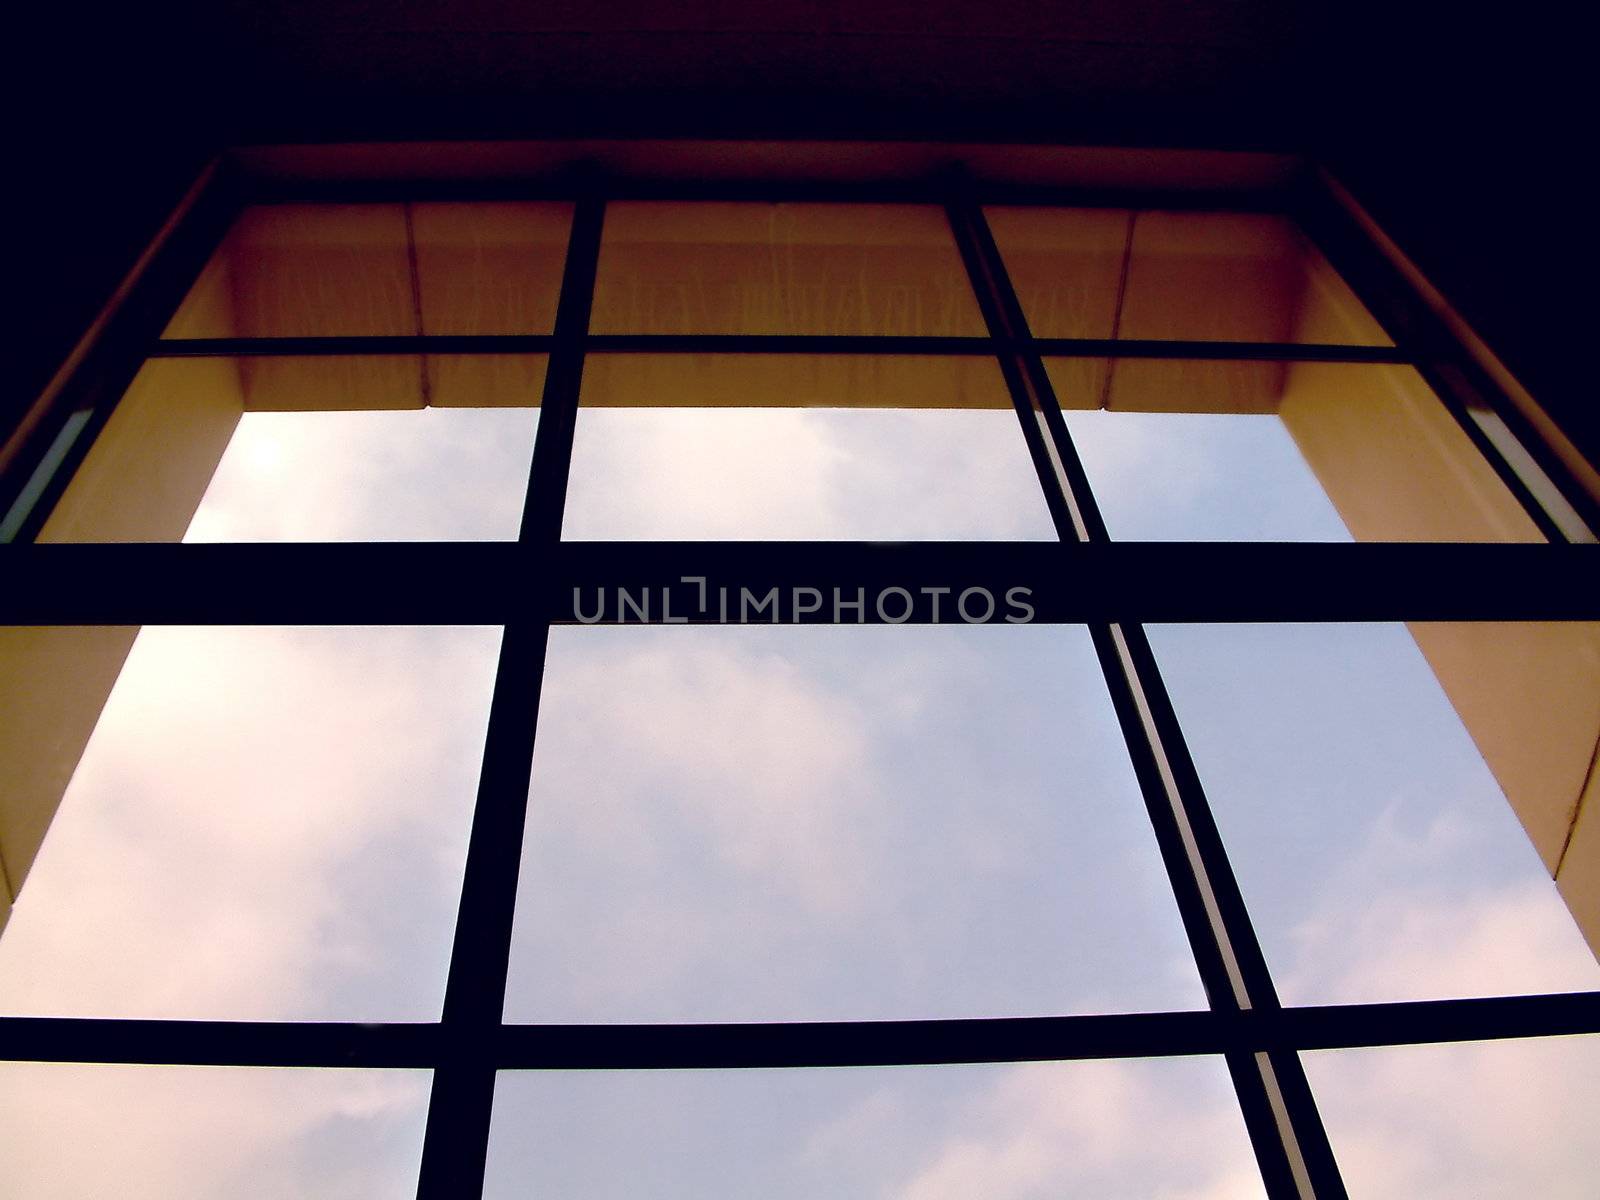 large window of an airport